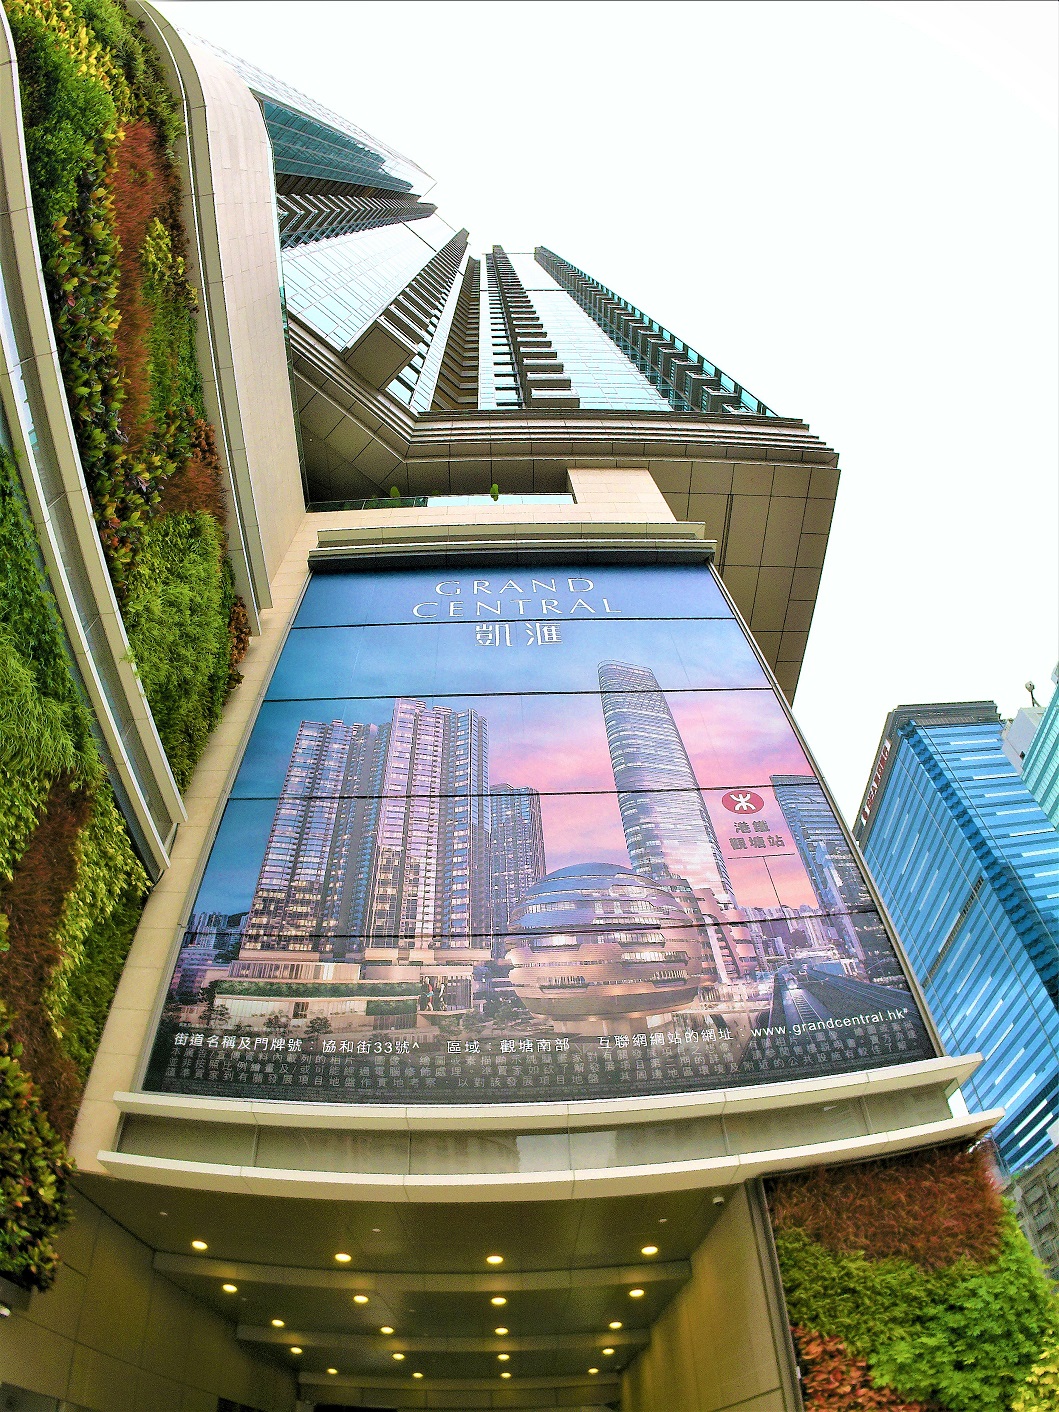 Grand Central is not at the CBD Central District on Hong Kong Island. It is at the old district Kwun Tong in Kowloon Peninsula.